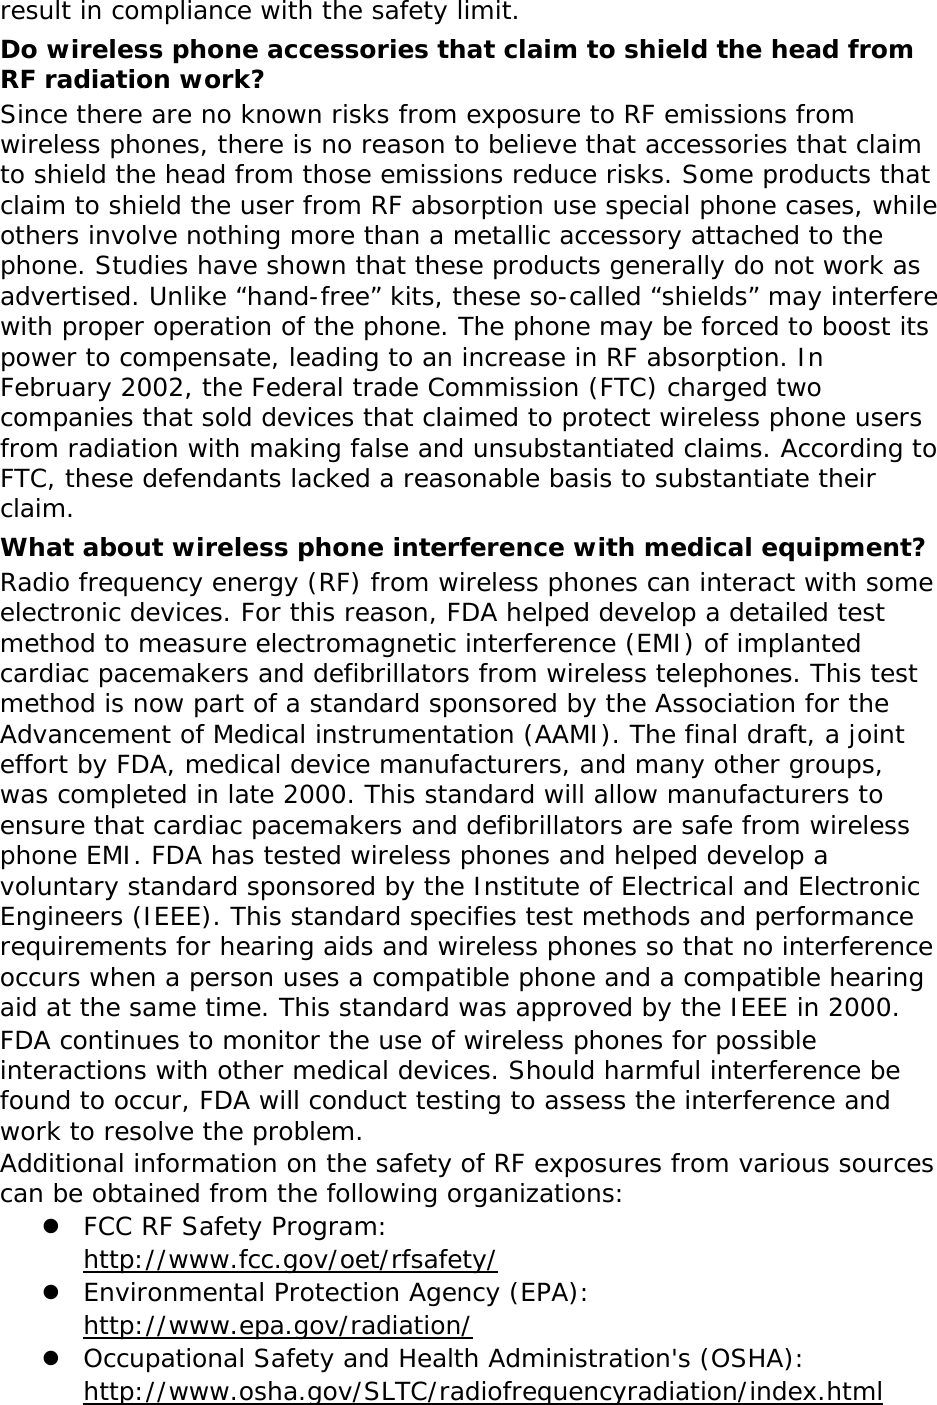 result in compliance with the safety limit. Do wireless phone accessories that claim to shield the head from RF radiation work? Since there are no known risks from exposure to RF emissions from wireless phones, there is no reason to believe that accessories that claim to shield the head from those emissions reduce risks. Some products that claim to shield the user from RF absorption use special phone cases, while others involve nothing more than a metallic accessory attached to the phone. Studies have shown that these products generally do not work as advertised. Unlike “hand-free” kits, these so-called “shields” may interfere with proper operation of the phone. The phone may be forced to boost its power to compensate, leading to an increase in RF absorption. In February 2002, the Federal trade Commission (FTC) charged two companies that sold devices that claimed to protect wireless phone users from radiation with making false and unsubstantiated claims. According to FTC, these defendants lacked a reasonable basis to substantiate their claim. What about wireless phone interference with medical equipment? Radio frequency energy (RF) from wireless phones can interact with some electronic devices. For this reason, FDA helped develop a detailed test method to measure electromagnetic interference (EMI) of implanted cardiac pacemakers and defibrillators from wireless telephones. This test method is now part of a standard sponsored by the Association for the Advancement of Medical instrumentation (AAMI). The final draft, a joint effort by FDA, medical device manufacturers, and many other groups, was completed in late 2000. This standard will allow manufacturers to ensure that cardiac pacemakers and defibrillators are safe from wireless phone EMI. FDA has tested wireless phones and helped develop a voluntary standard sponsored by the Institute of Electrical and Electronic Engineers (IEEE). This standard specifies test methods and performance requirements for hearing aids and wireless phones so that no interference occurs when a person uses a compatible phone and a compatible hearing aid at the same time. This standard was approved by the IEEE in 2000. FDA continues to monitor the use of wireless phones for possible interactions with other medical devices. Should harmful interference be found to occur, FDA will conduct testing to assess the interference and work to resolve the problem. Additional information on the safety of RF exposures from various sources can be obtained from the following organizations: z FCC RF Safety Program:  http://www.fcc.gov/oet/rfsafety/ z Environmental Protection Agency (EPA):  http://www.epa.gov/radiation/ z Occupational Safety and Health Administration&apos;s (OSHA):        http://www.osha.gov/SLTC/radiofrequencyradiation/index.html 